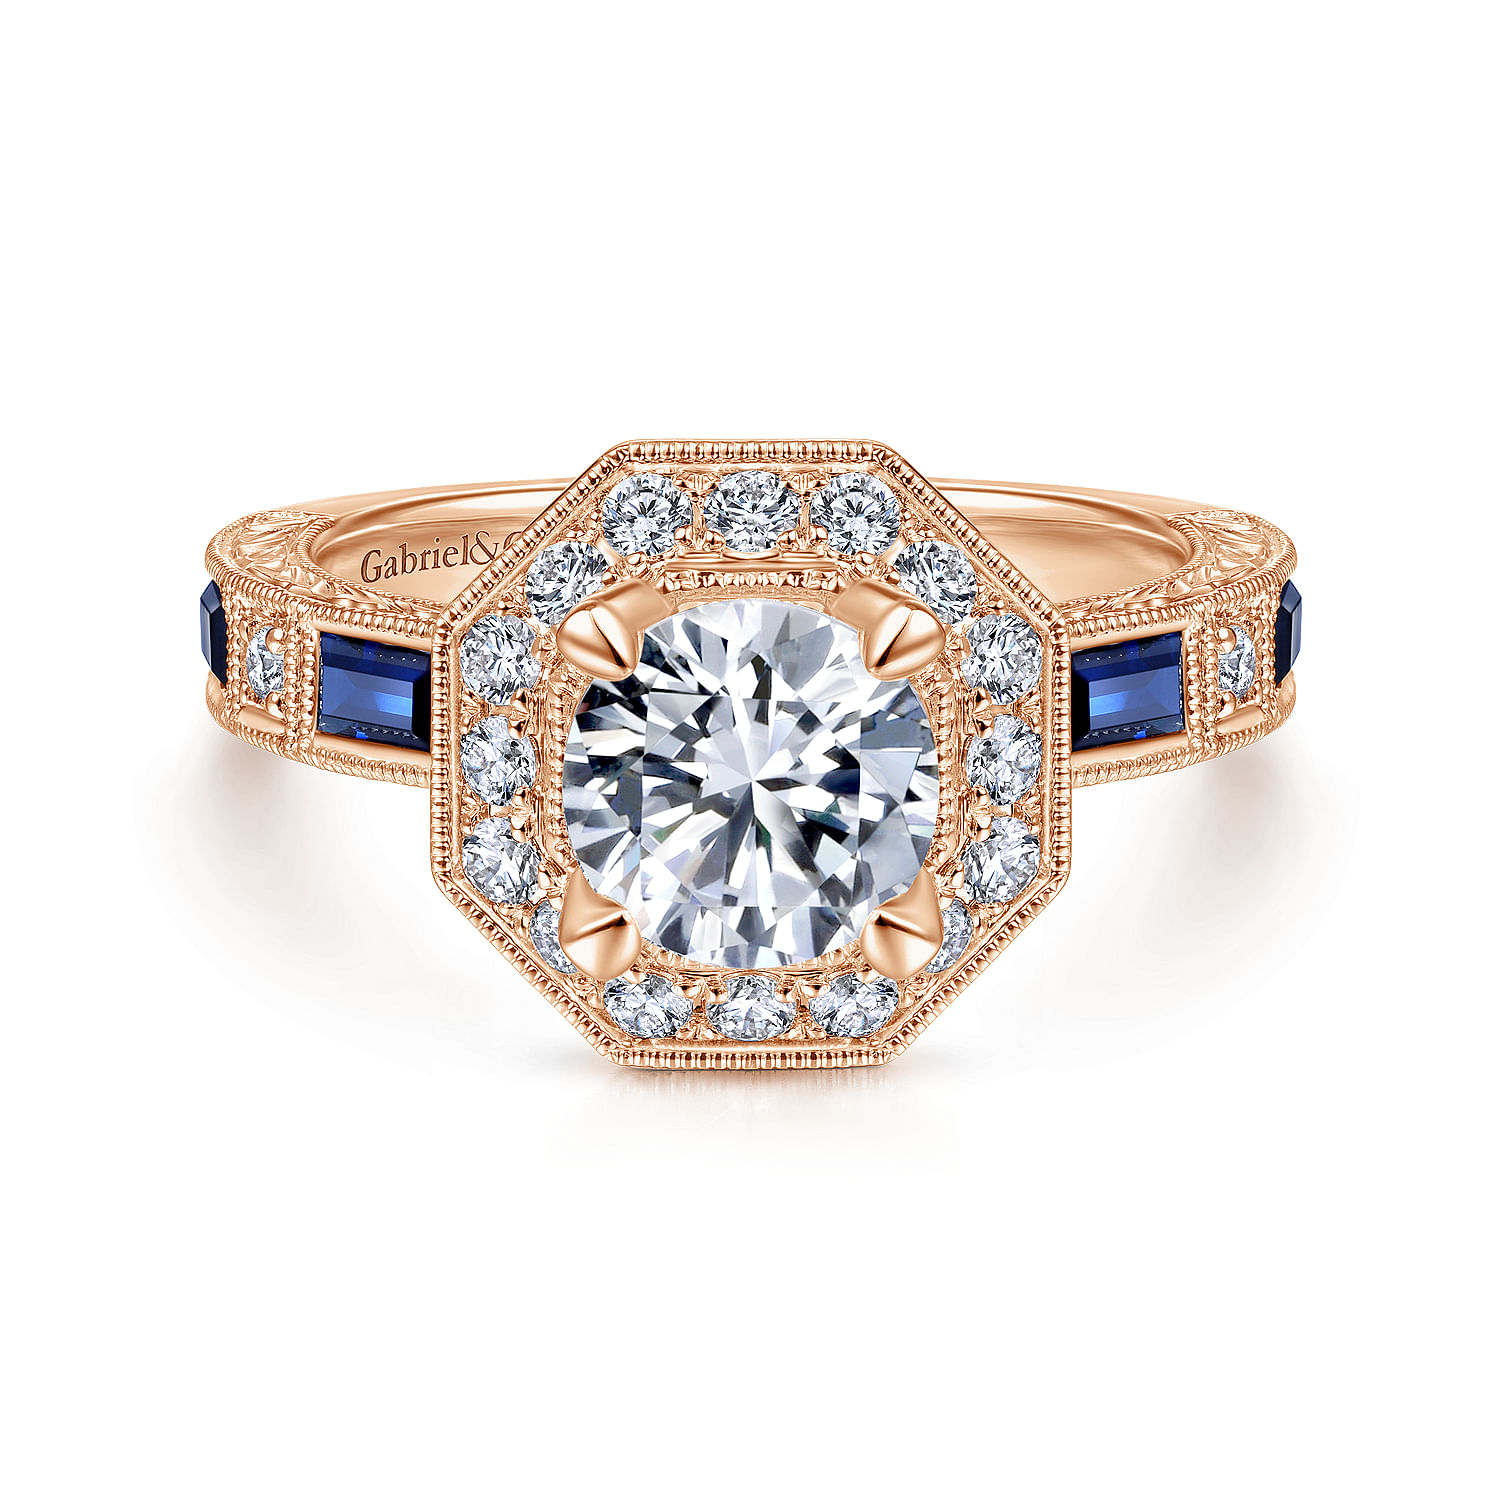 Art Deco 14K Rose Gold Octagonal Halo Round Diamond and Sapphire Engagement Ring